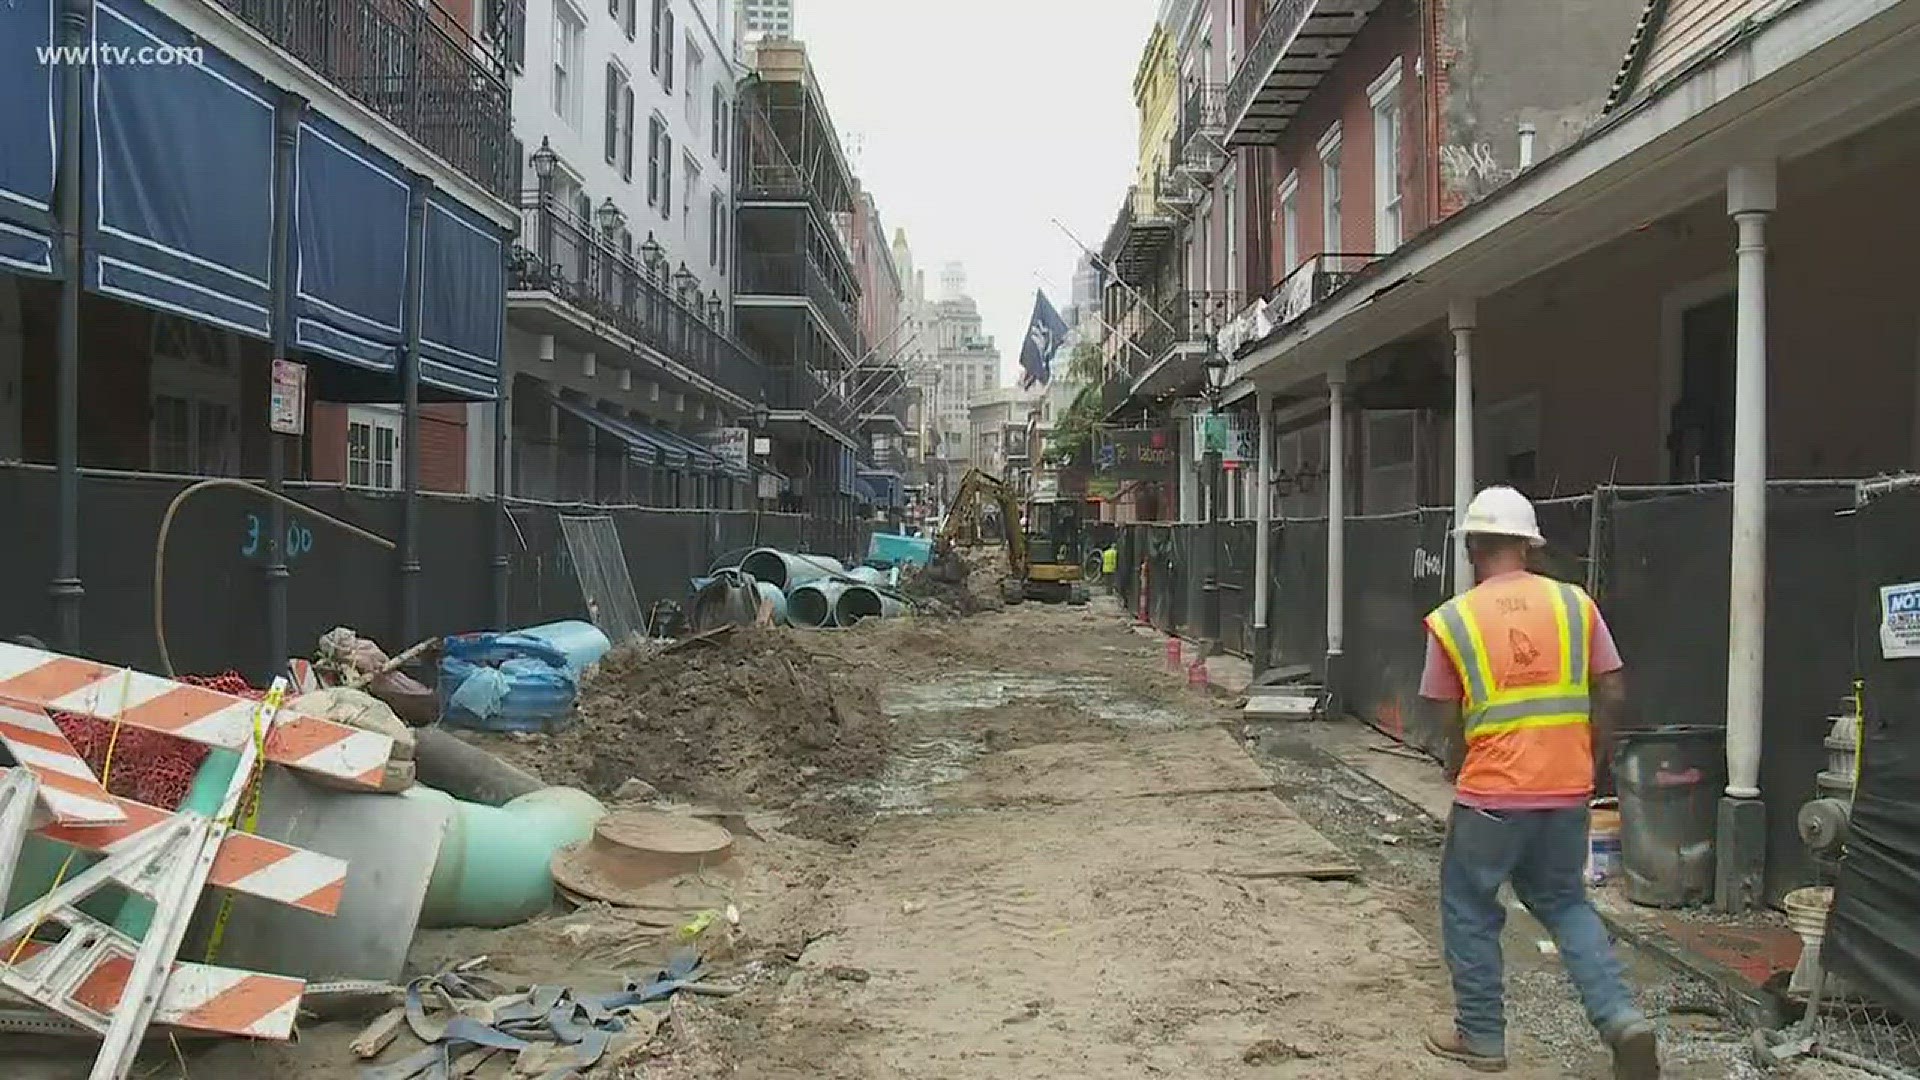 Starting at 8 a.m. Monday, the Department of Public Works and the Sewerage & Water Board will begin work replacing roadway and sidewalks on Bourbon Street from St. Louis to Dumaine streets.